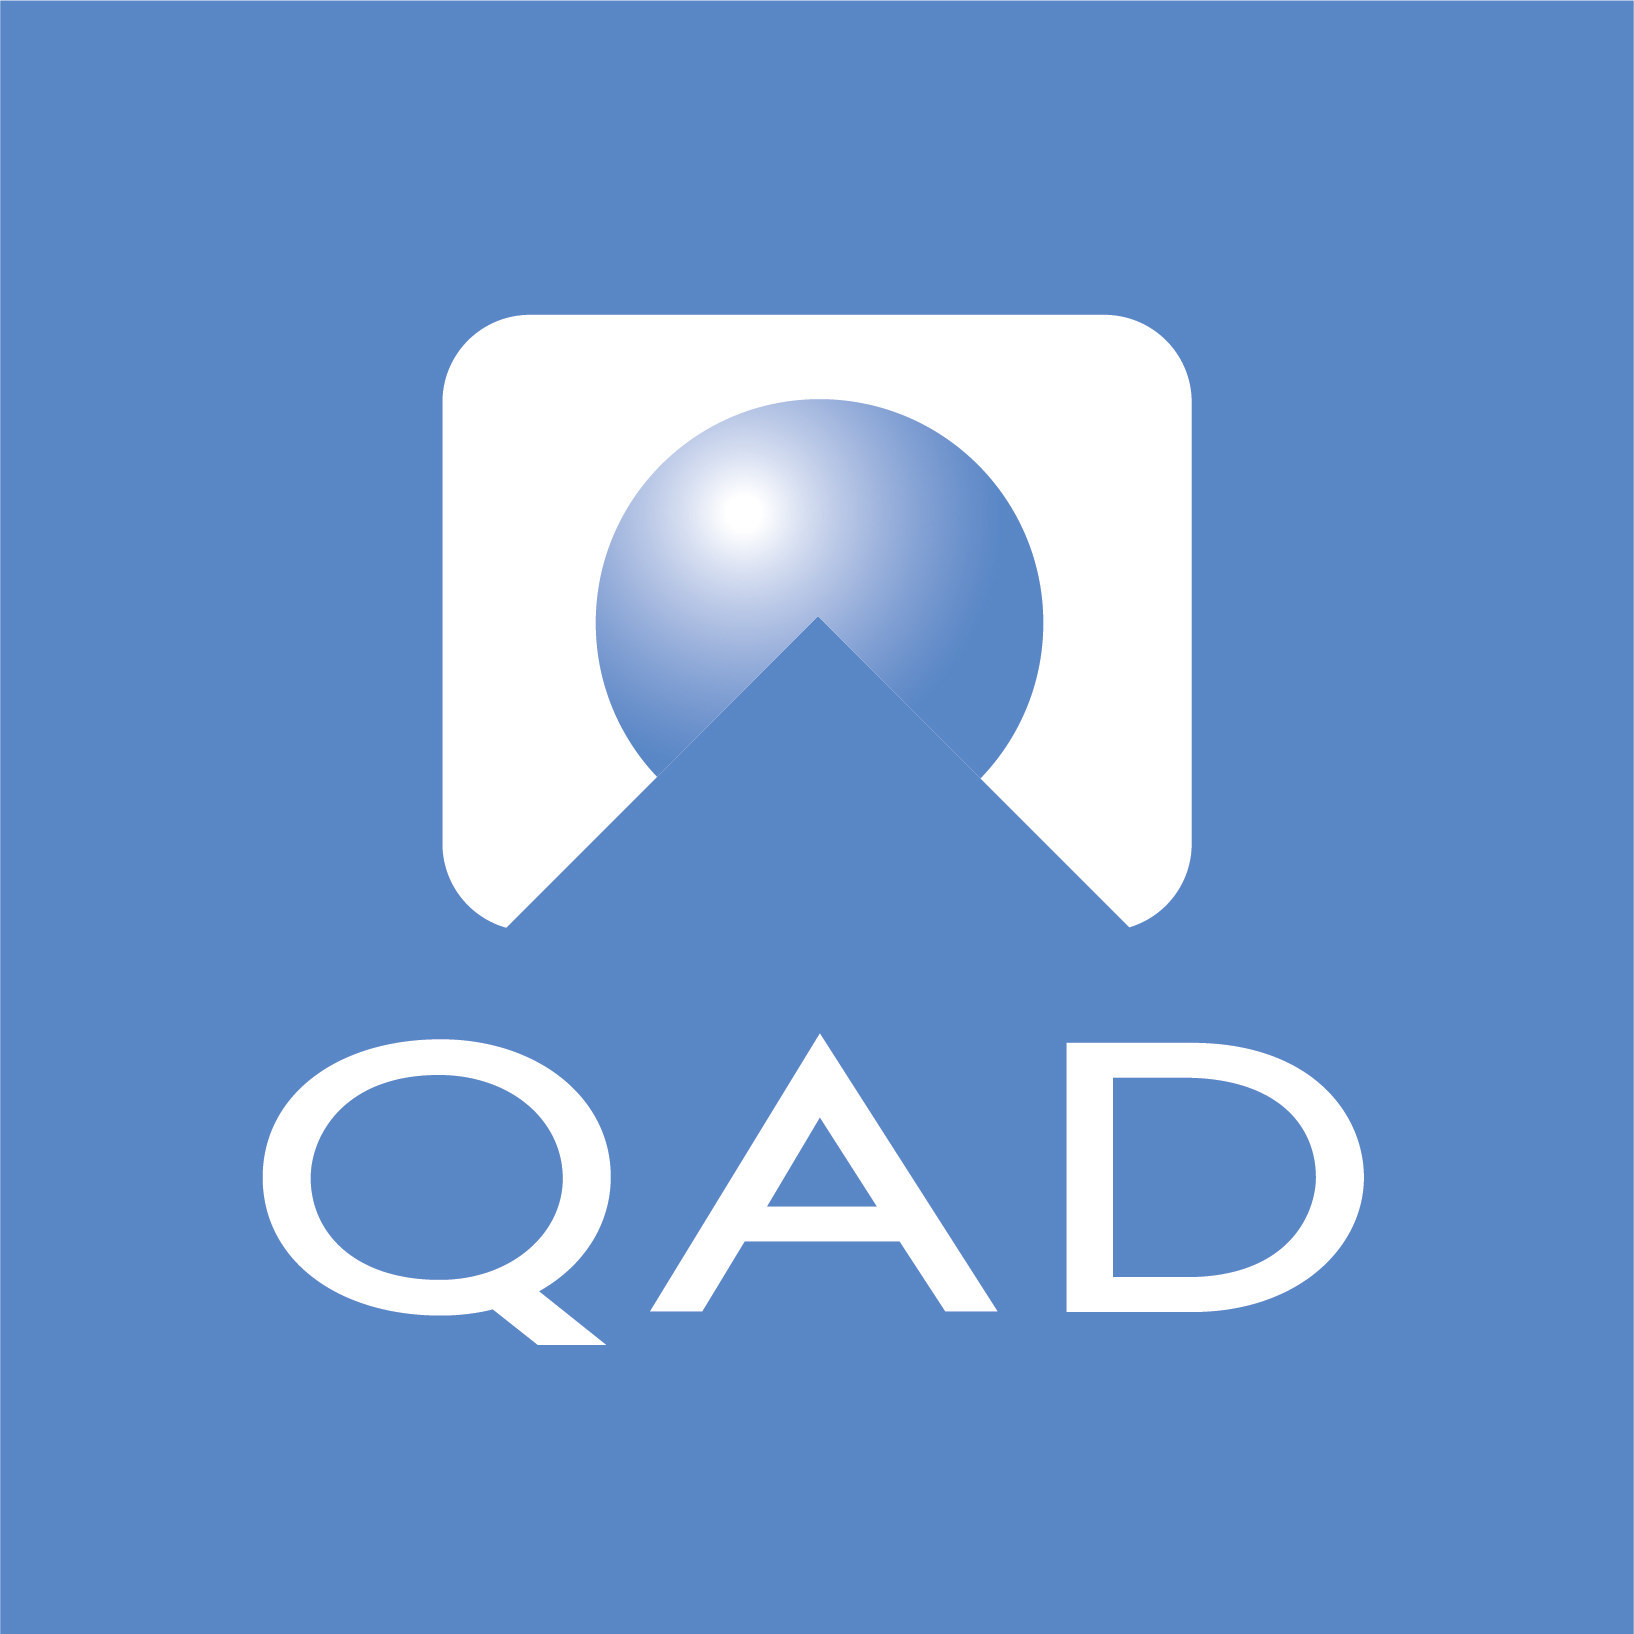 QAD To Report Fiscal 2019 Fourth Quarter Financial Results And Host A Conference Call On Wednesday, March 20, 2019